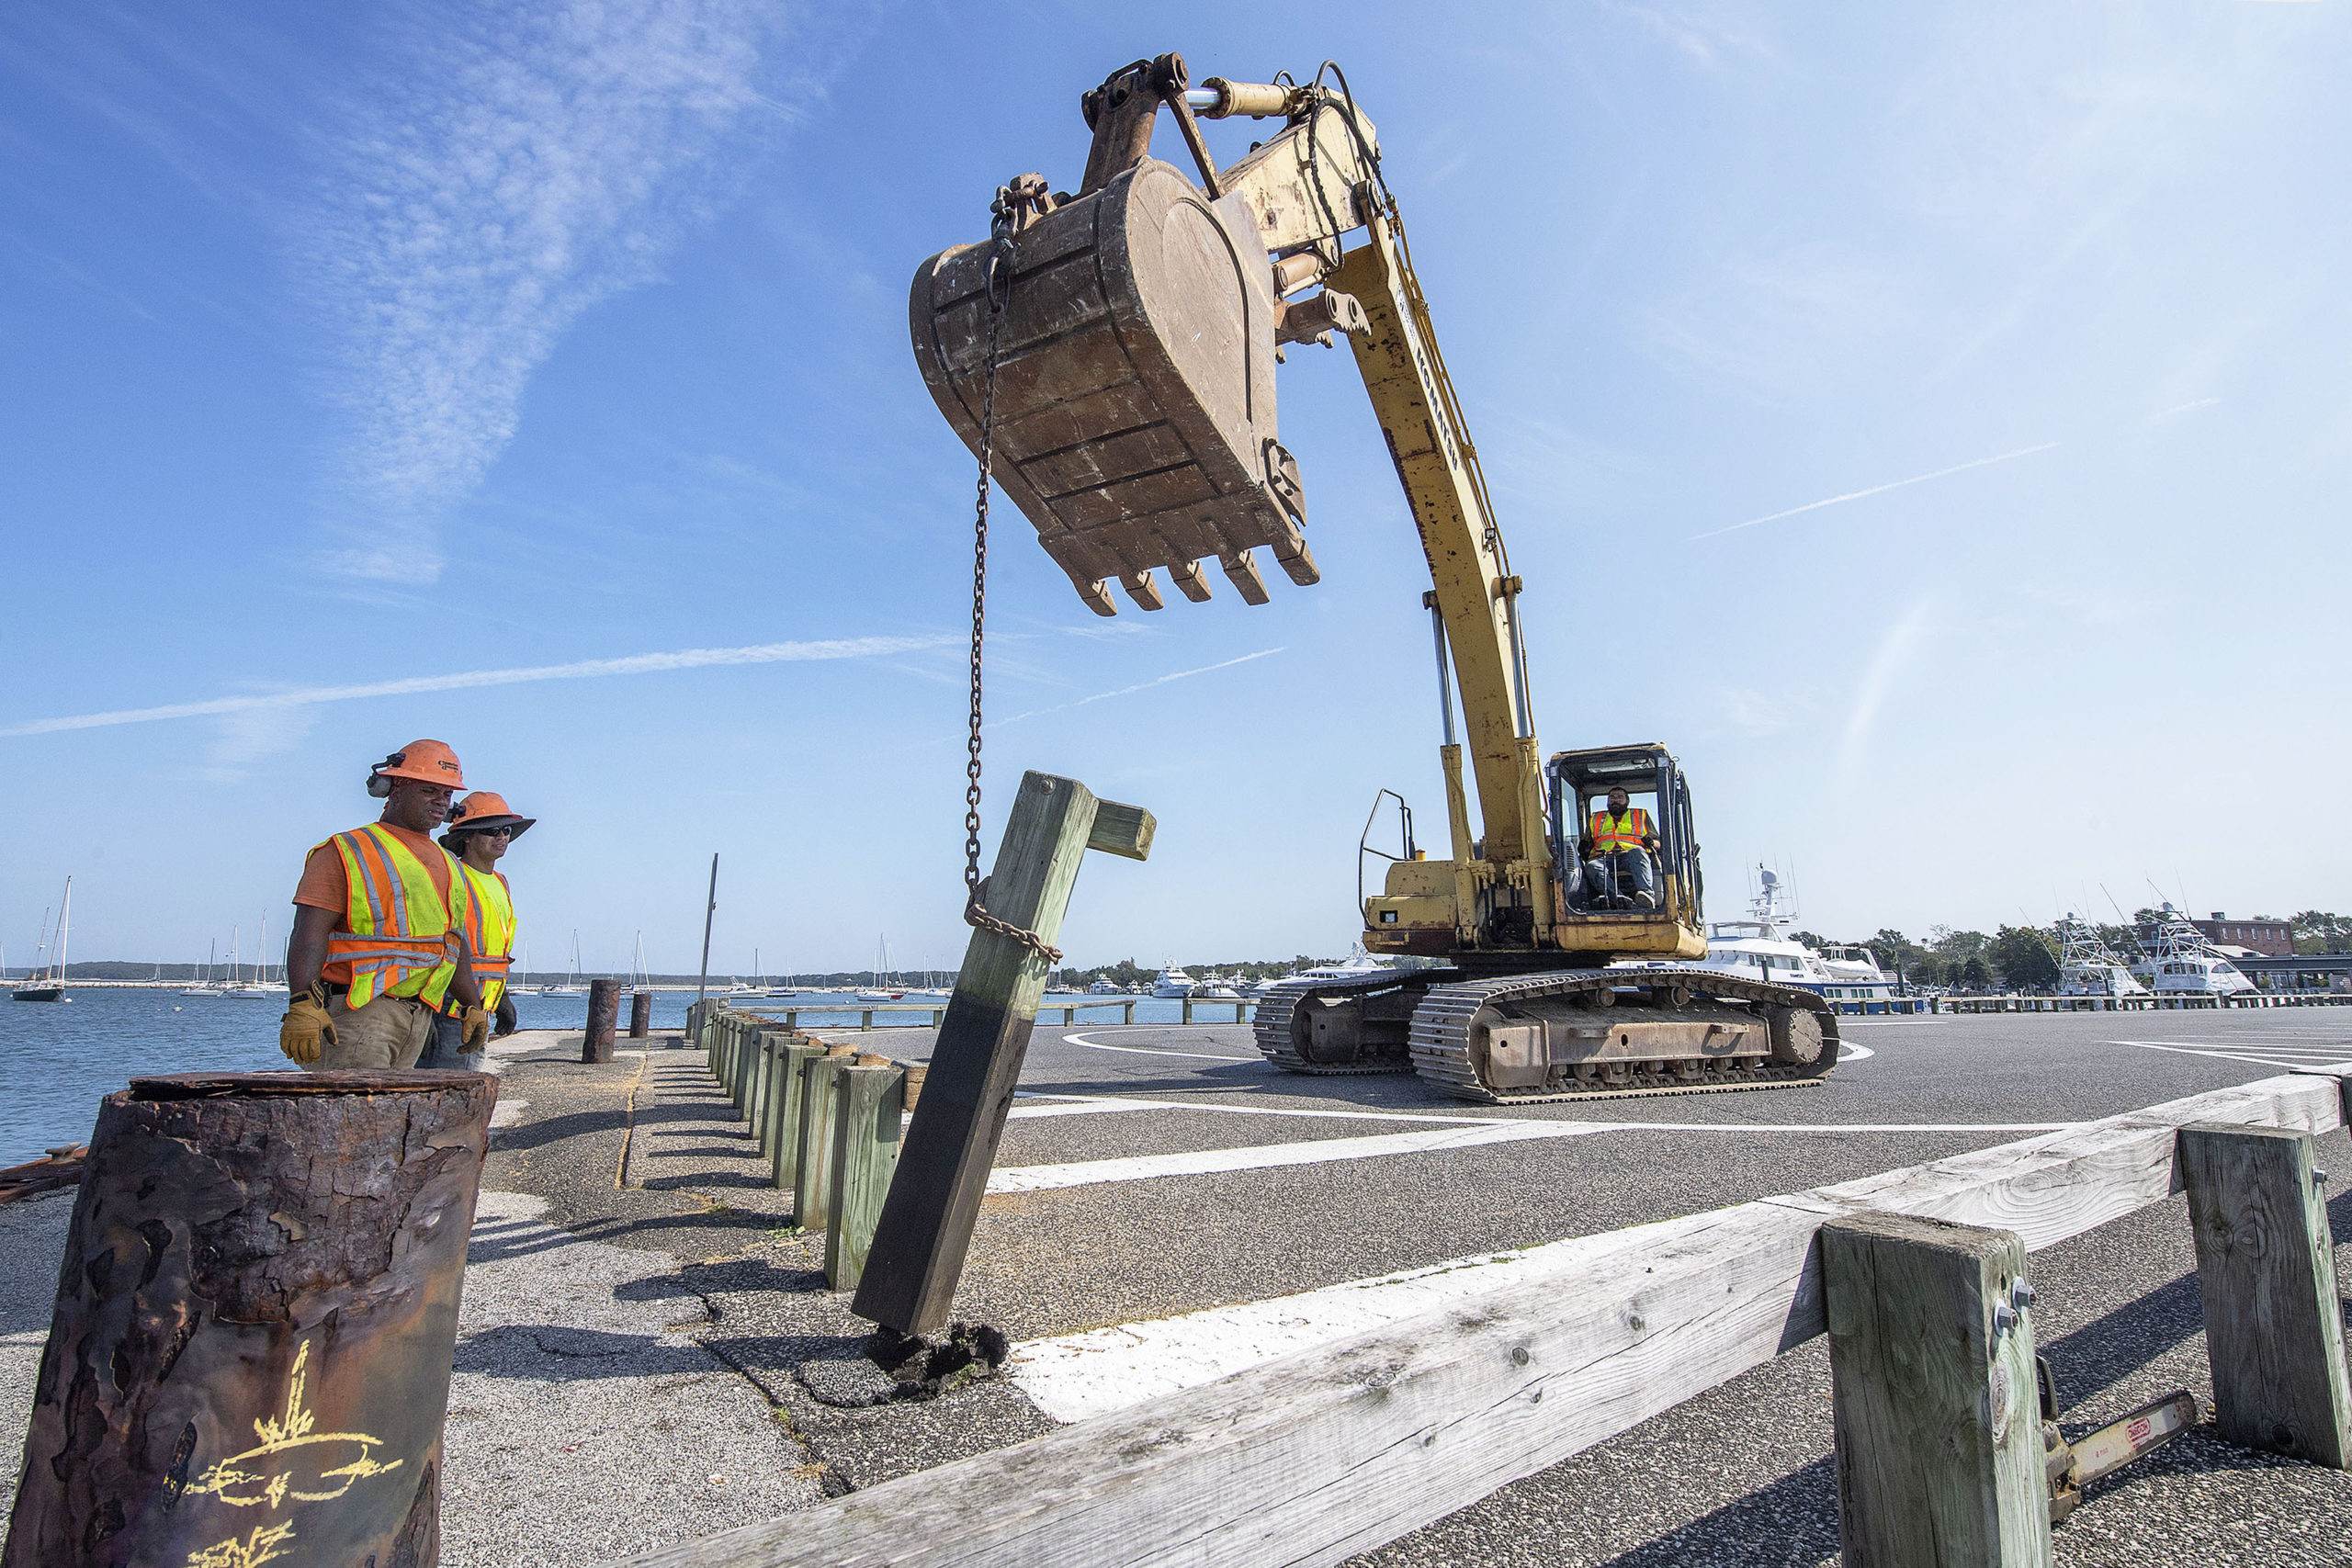 Work, which began last fall on Sag Harbor's Long Wharf, is nearing complettion. MICHAEL HELLER